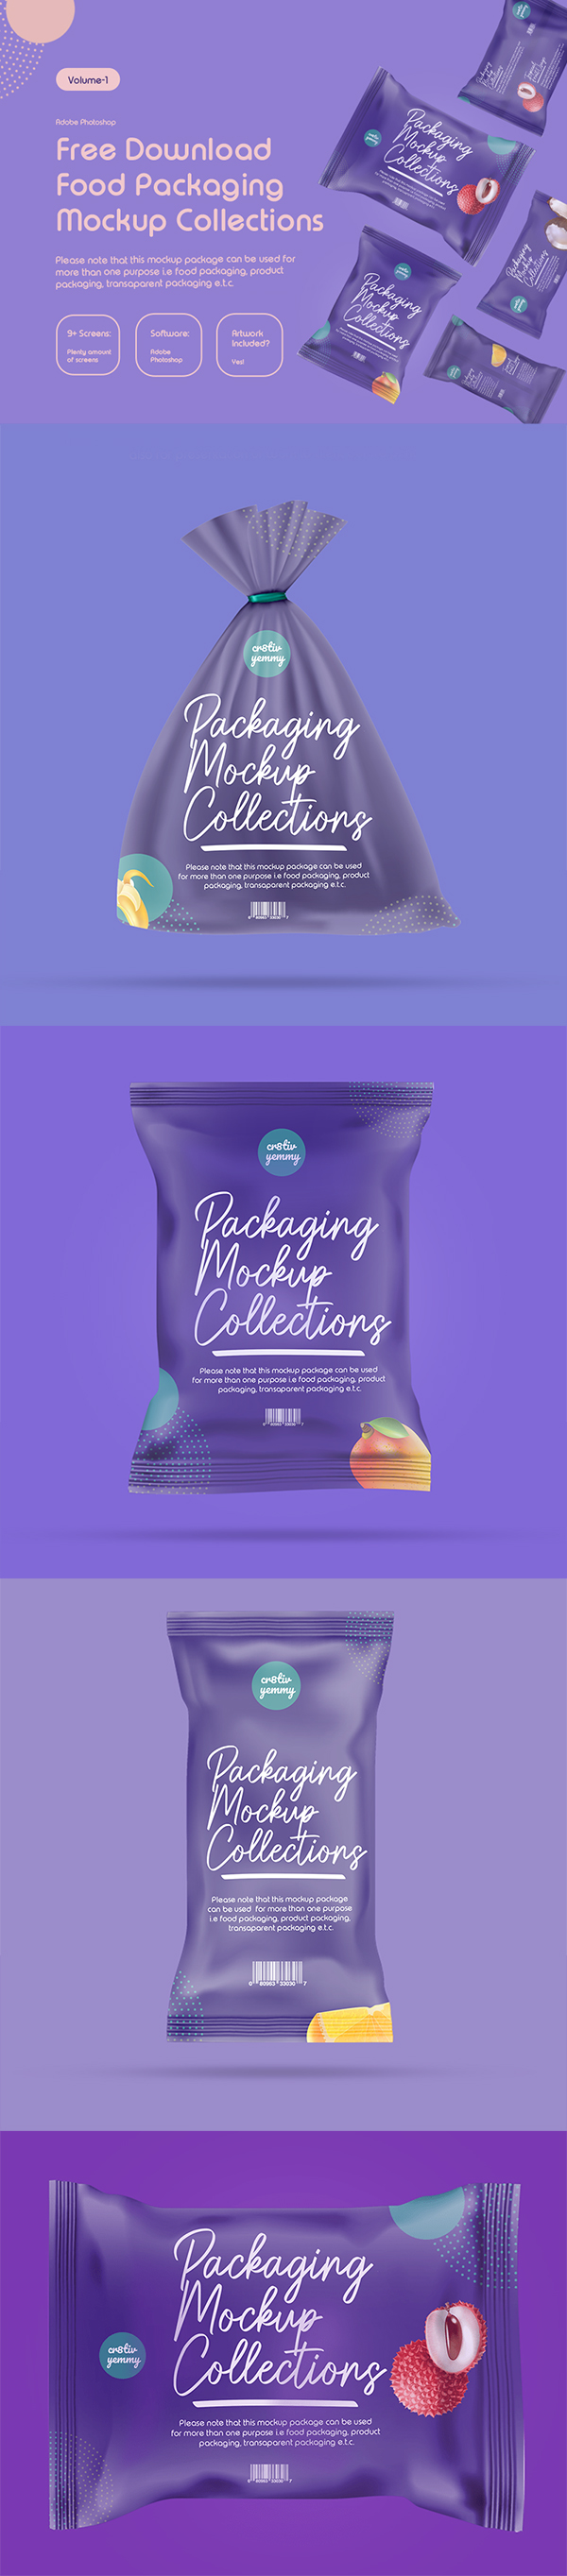 Packaging Mockups Collections